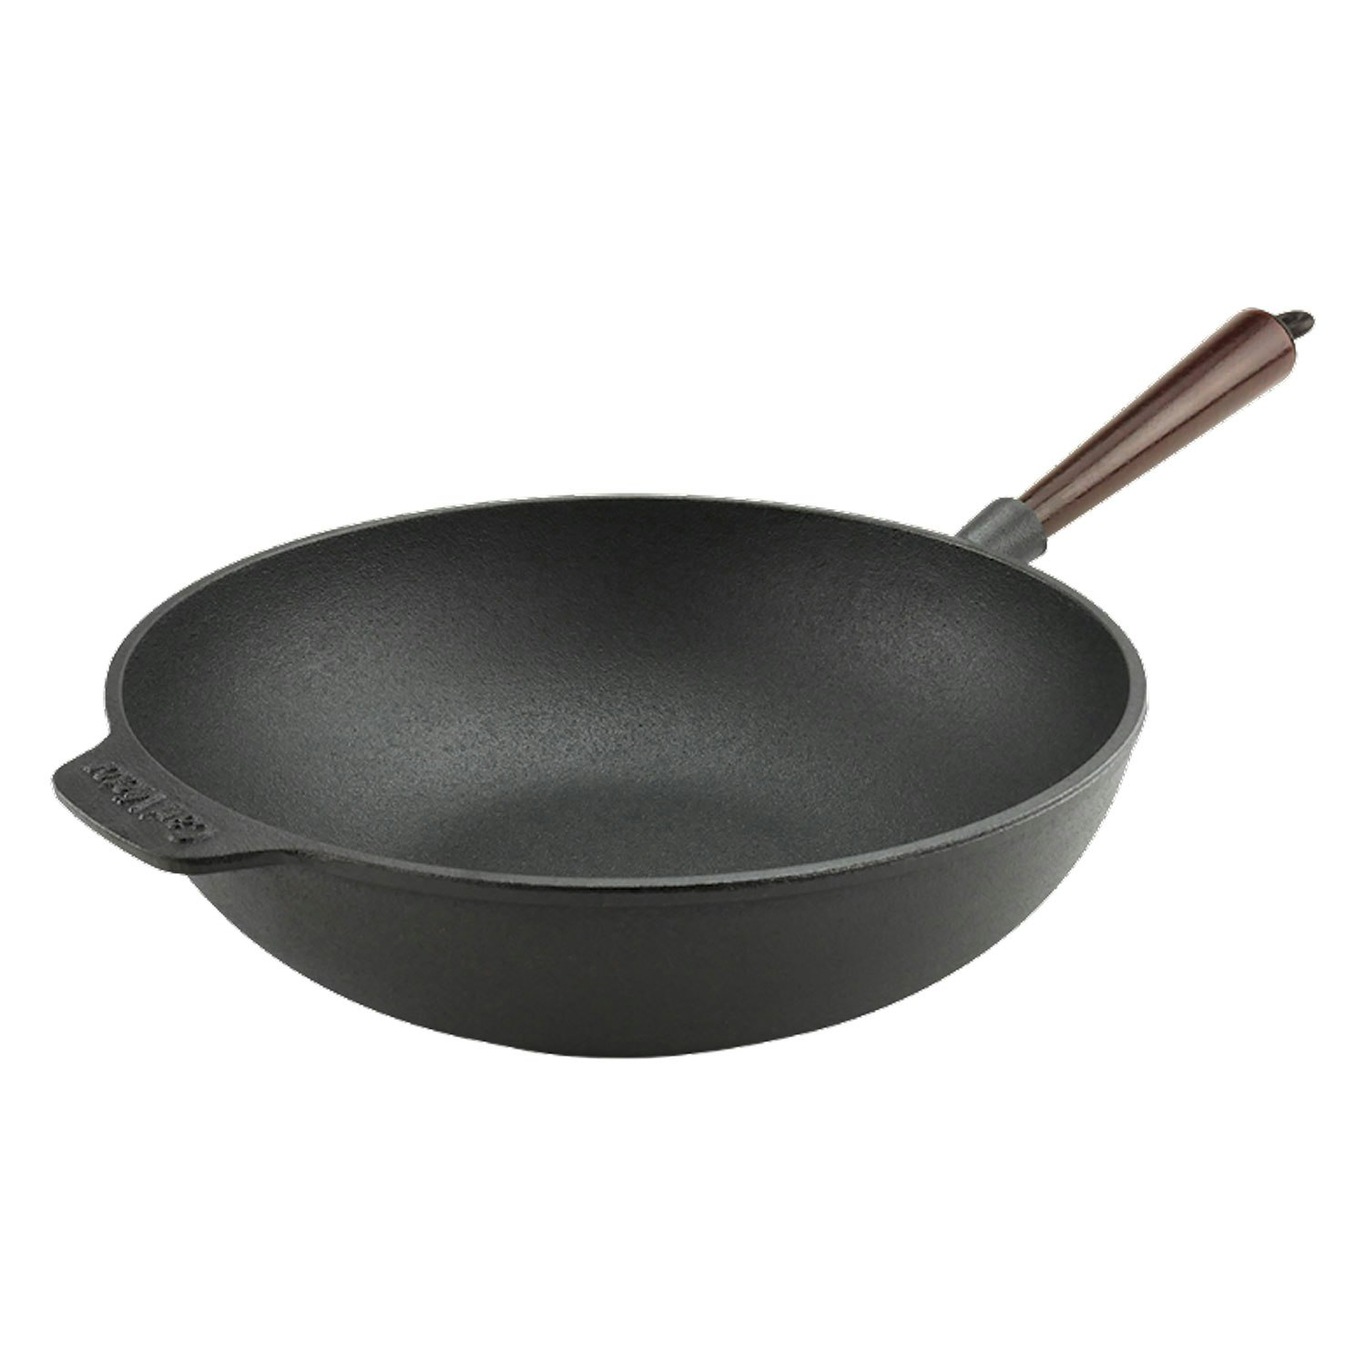 Wok Pan 30 cm With Wooden Handle